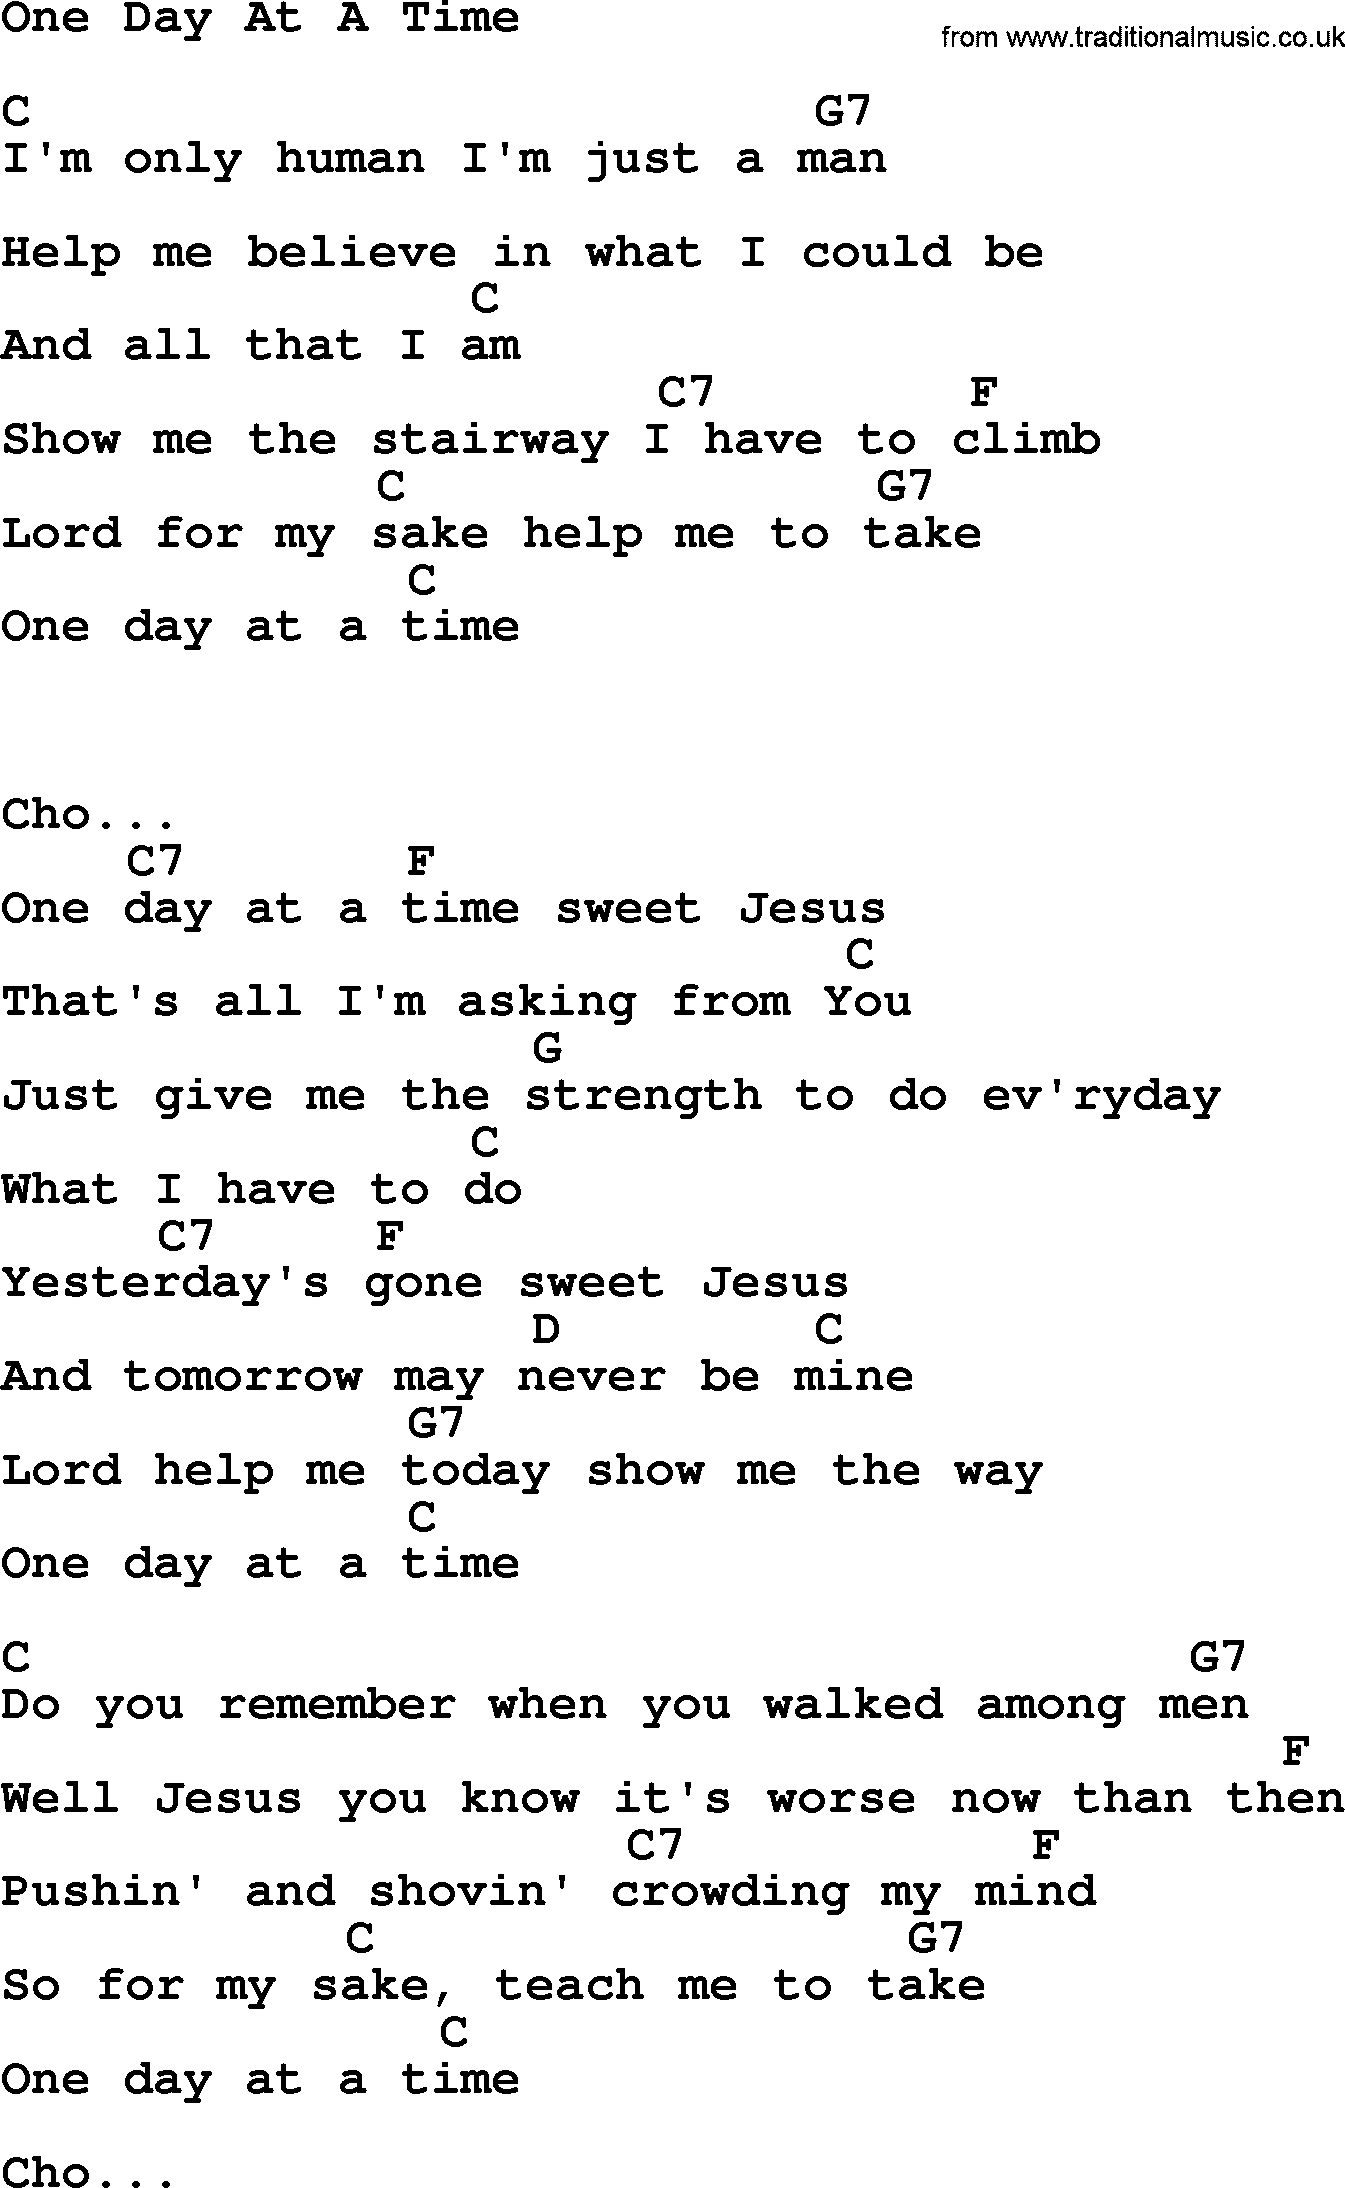 Kris Kristofferson song: One Day At A Time lyrics and chords